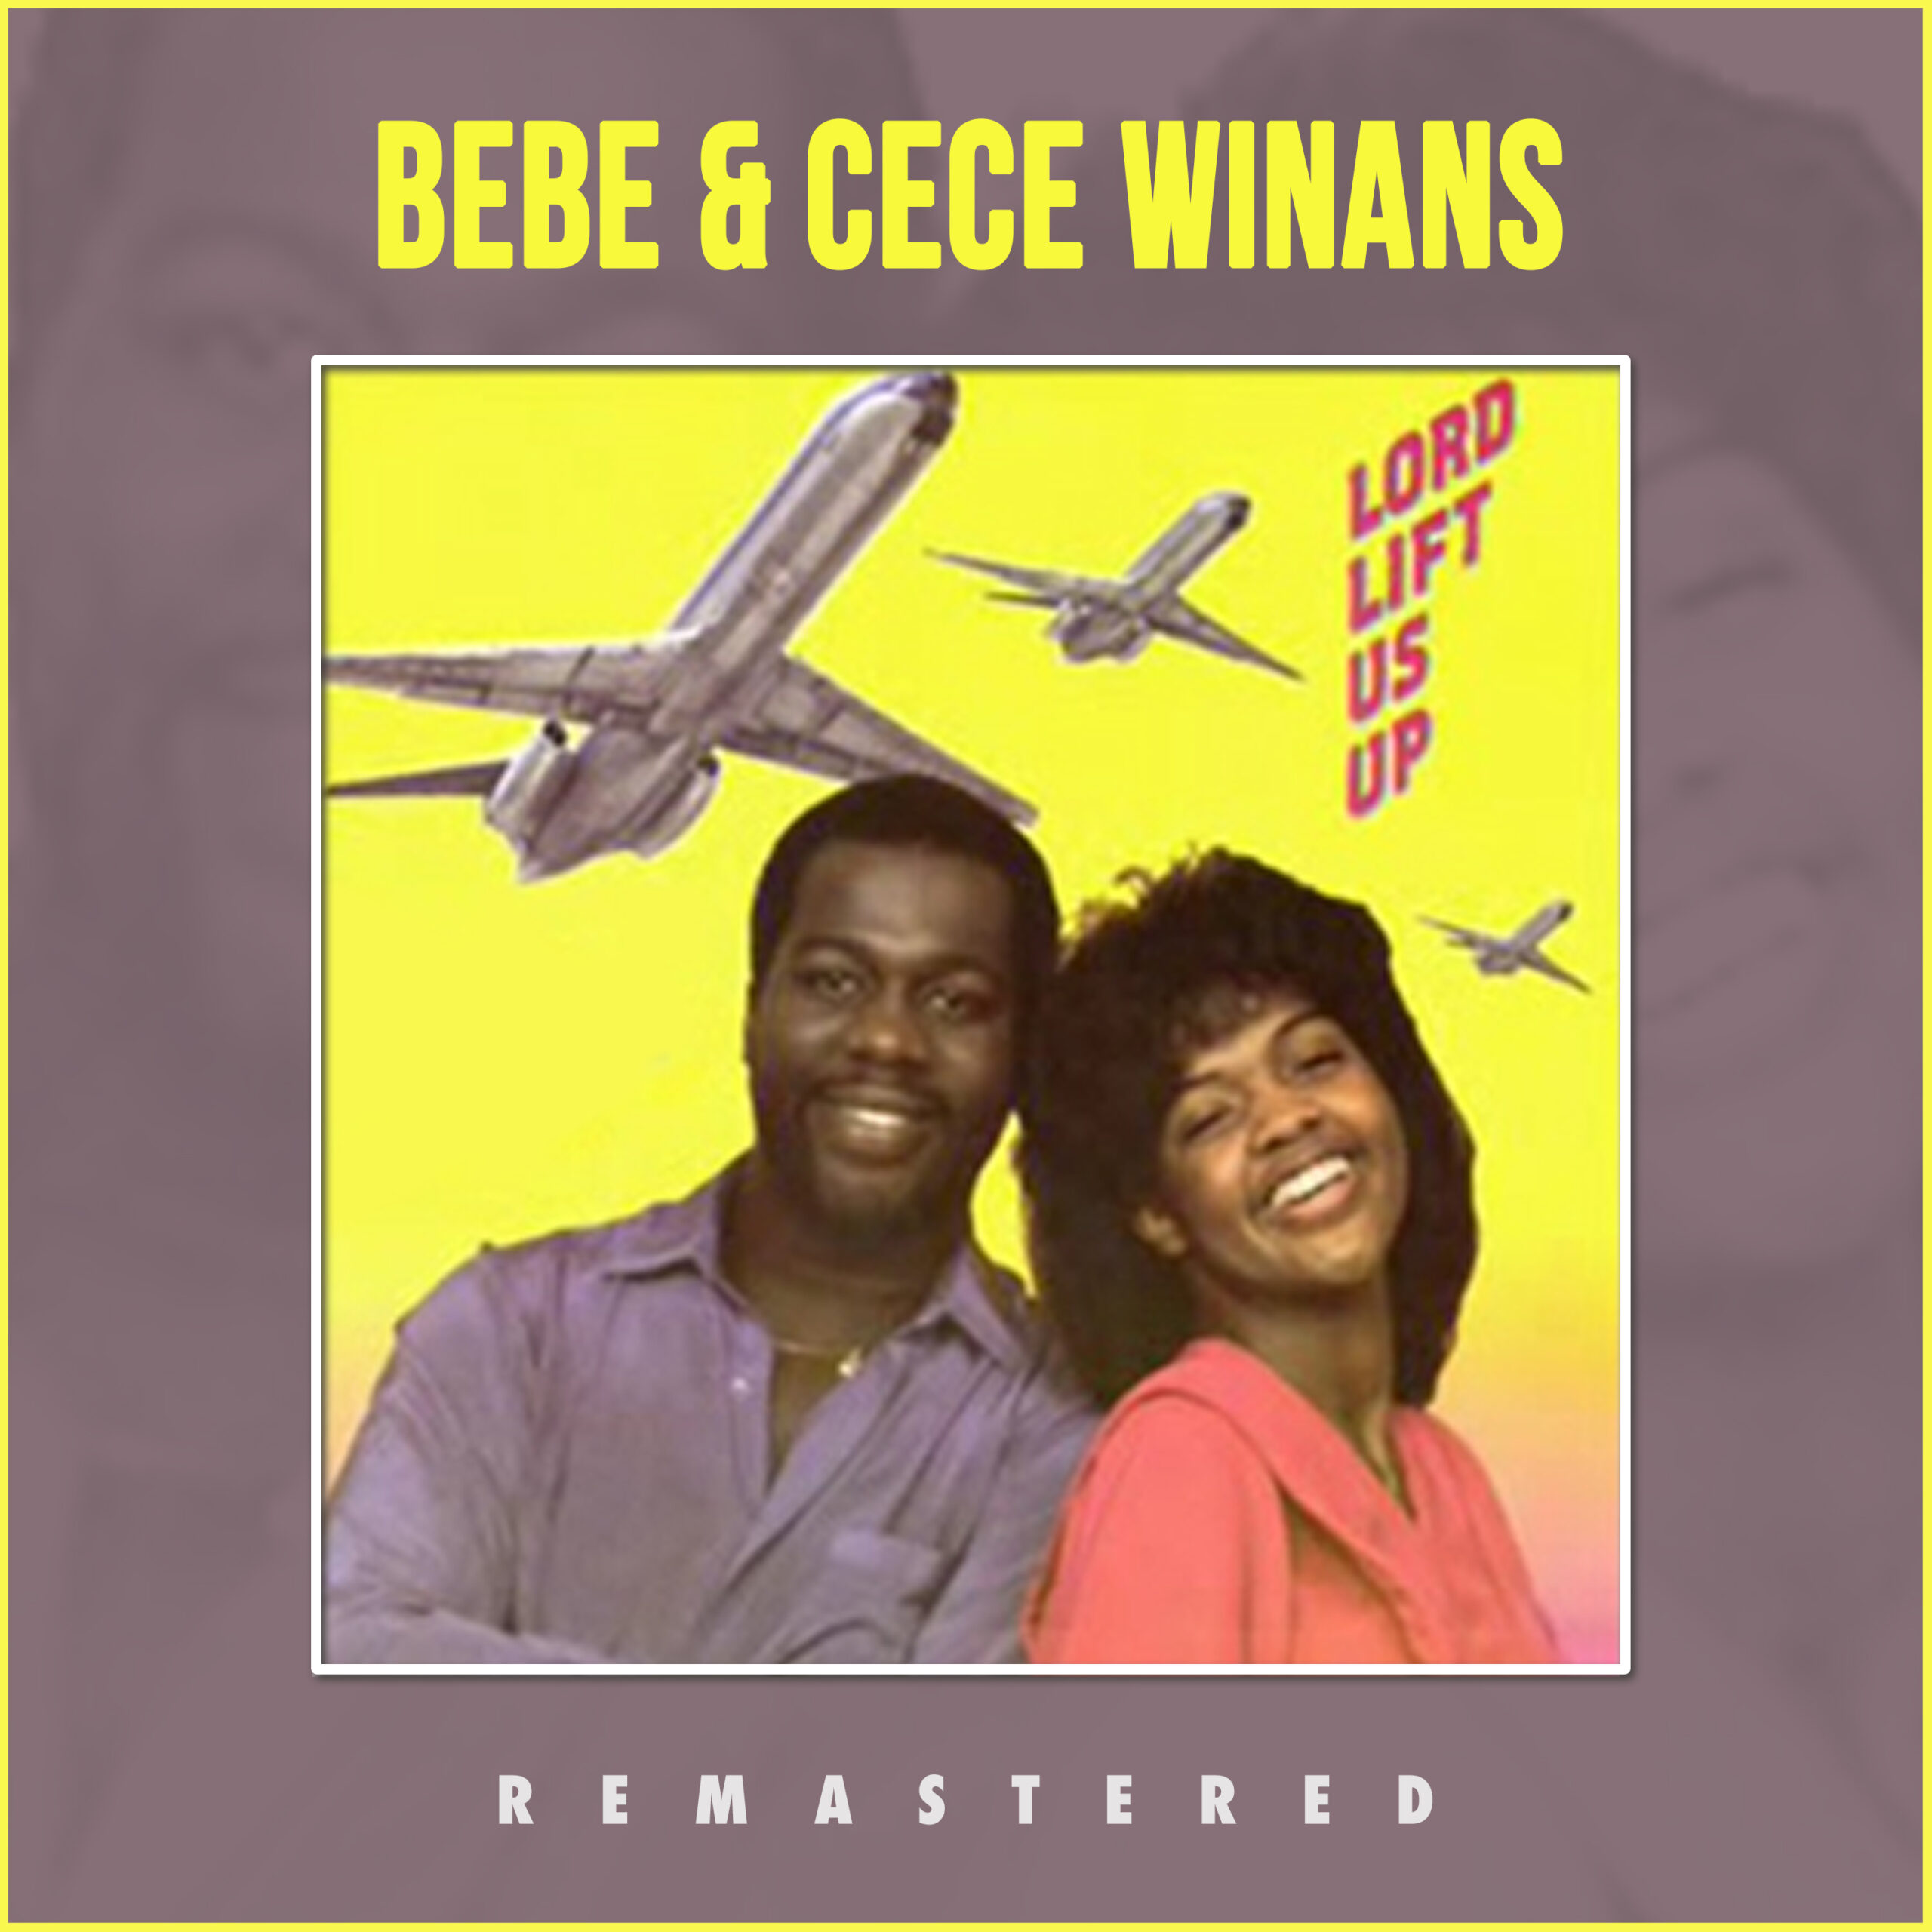 BeBe & CeCe Winans : Lord Lift Us Up [Remastered] (Mp3)